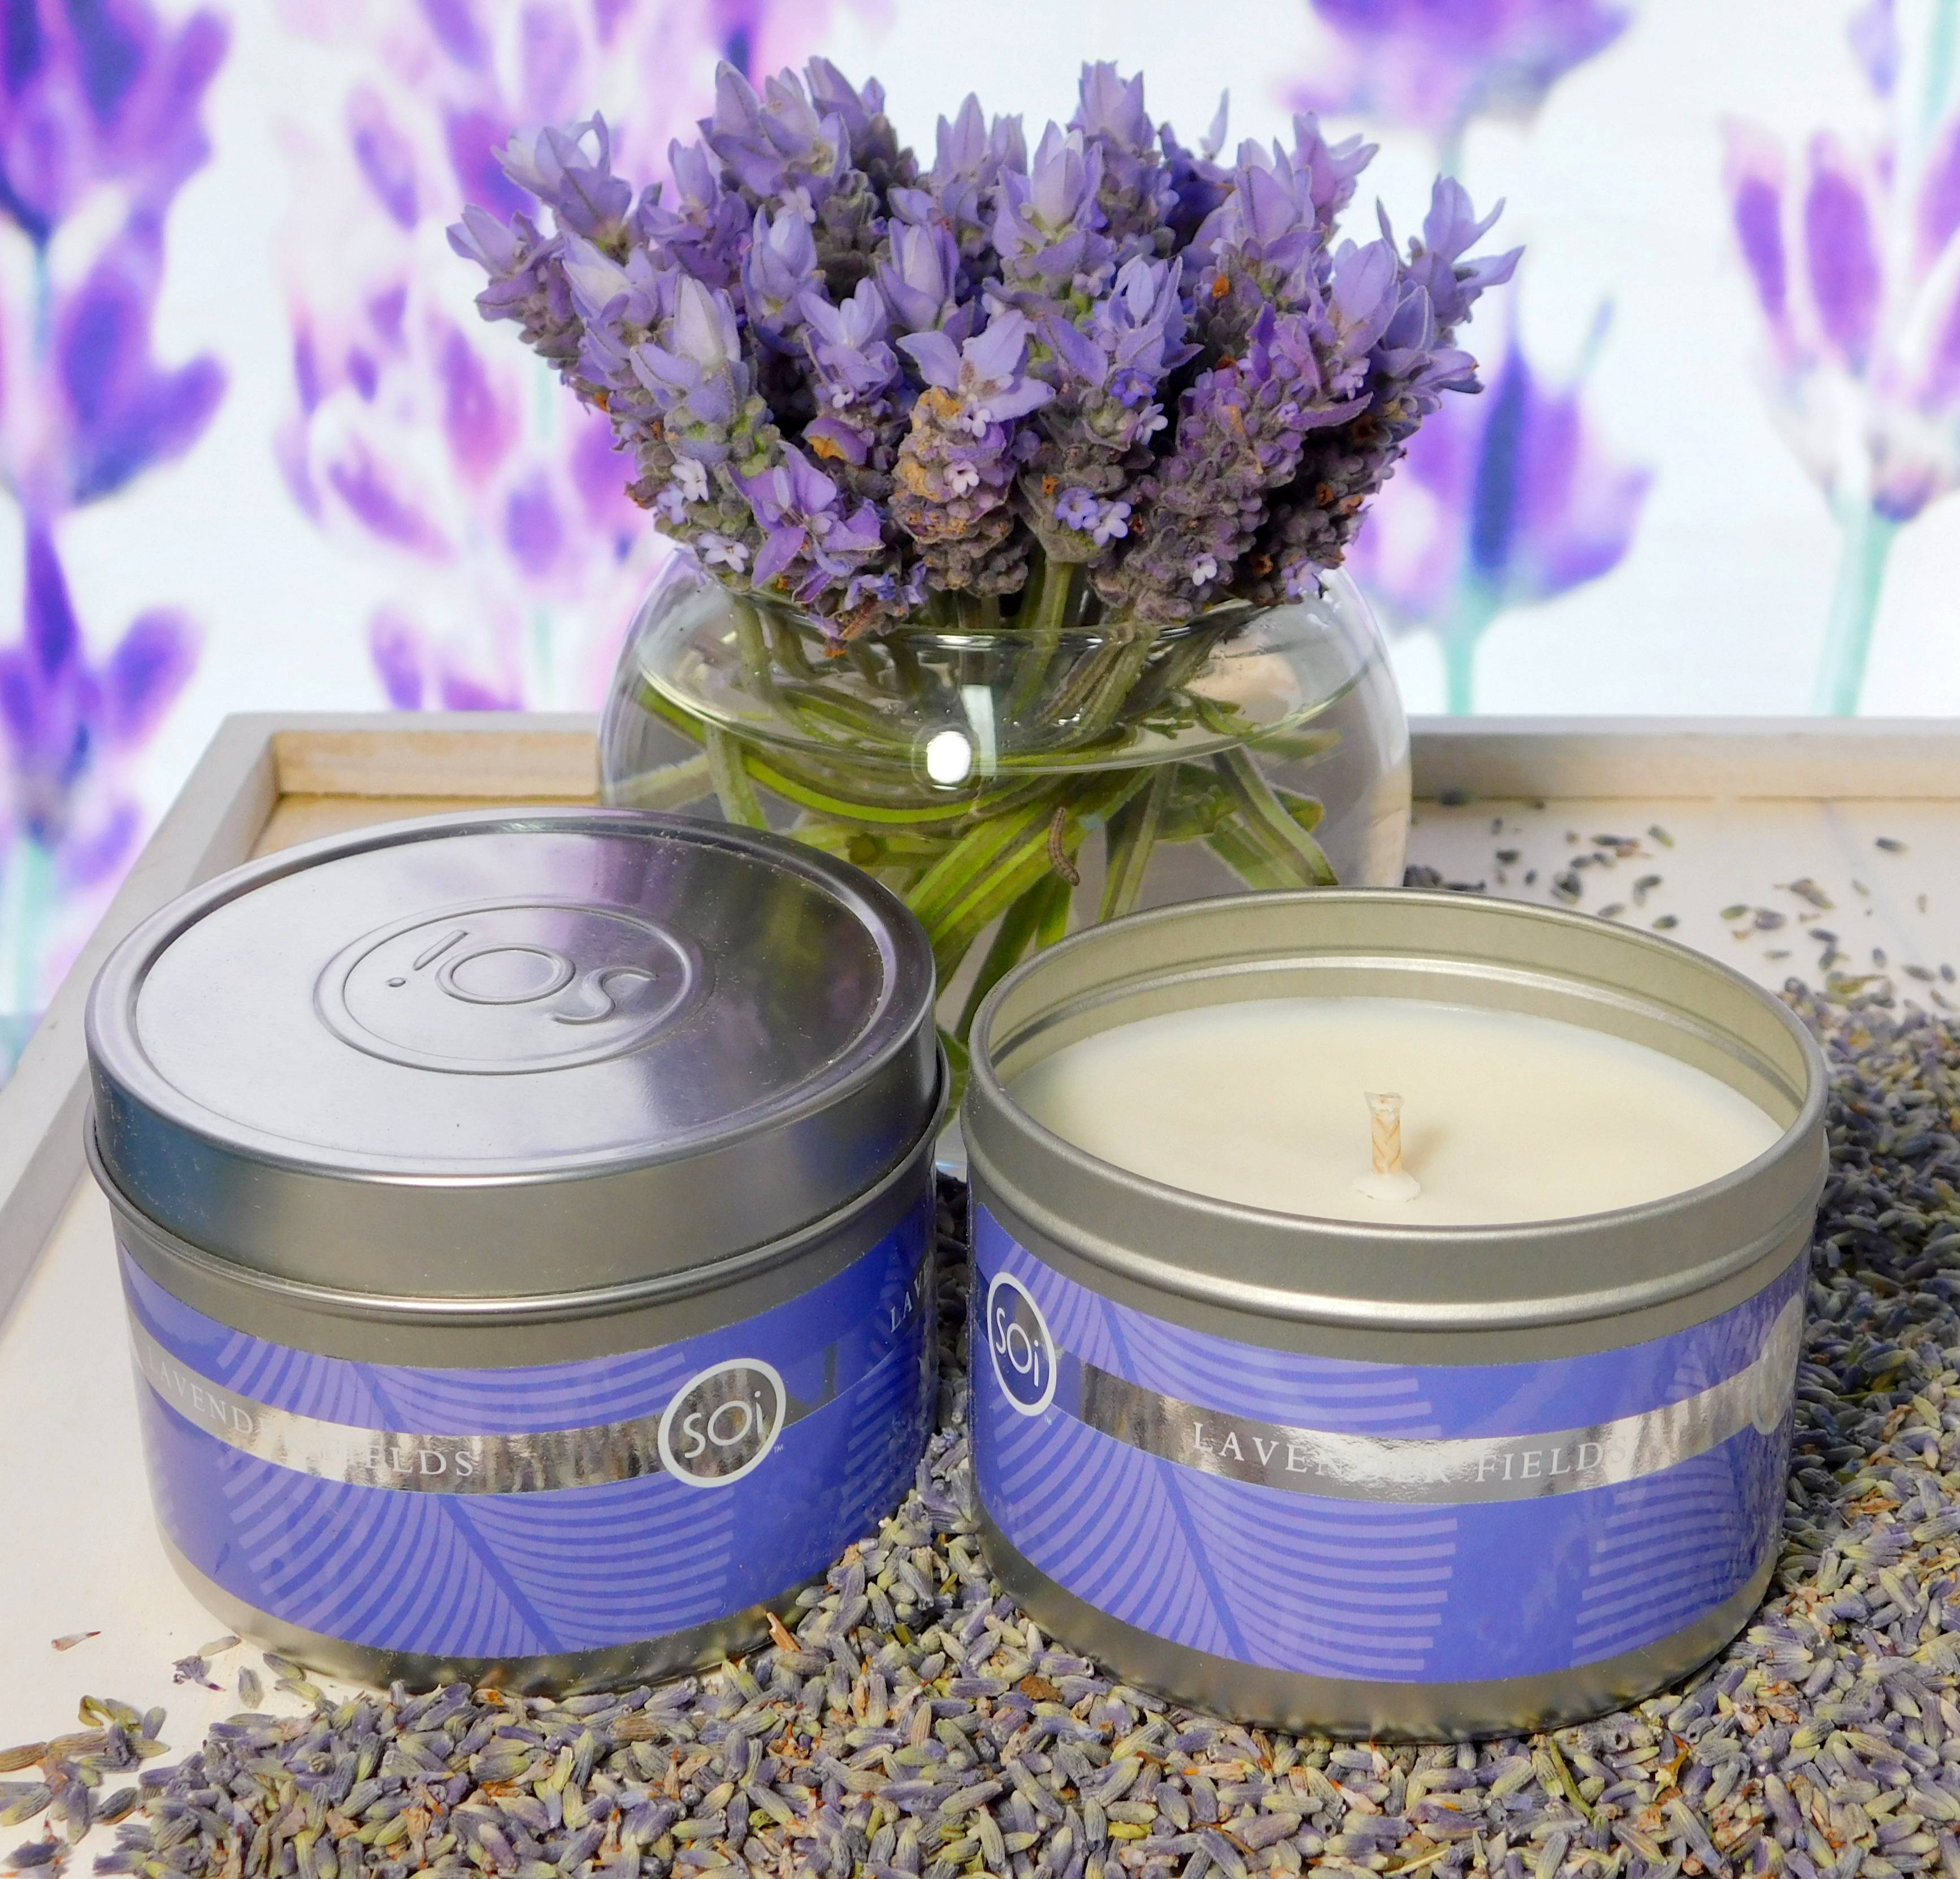 Lavender soy candle for soothing lavender aromatherapy.